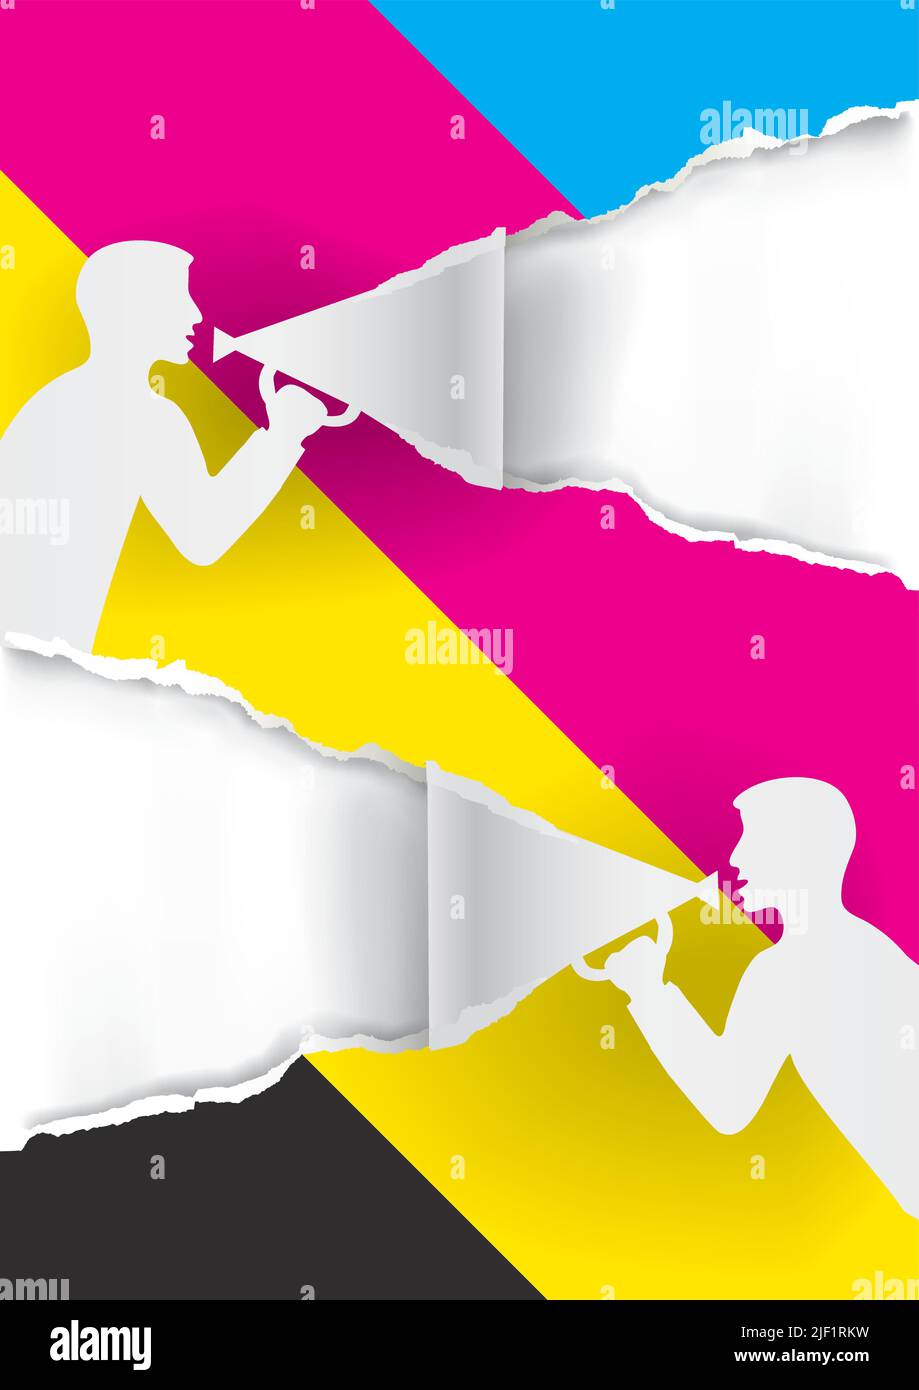 Two Men with megaphone tearing  paper with CMYK colors, promotion background. Illustration of paper background with stylized male silhouettes. Stock Vector